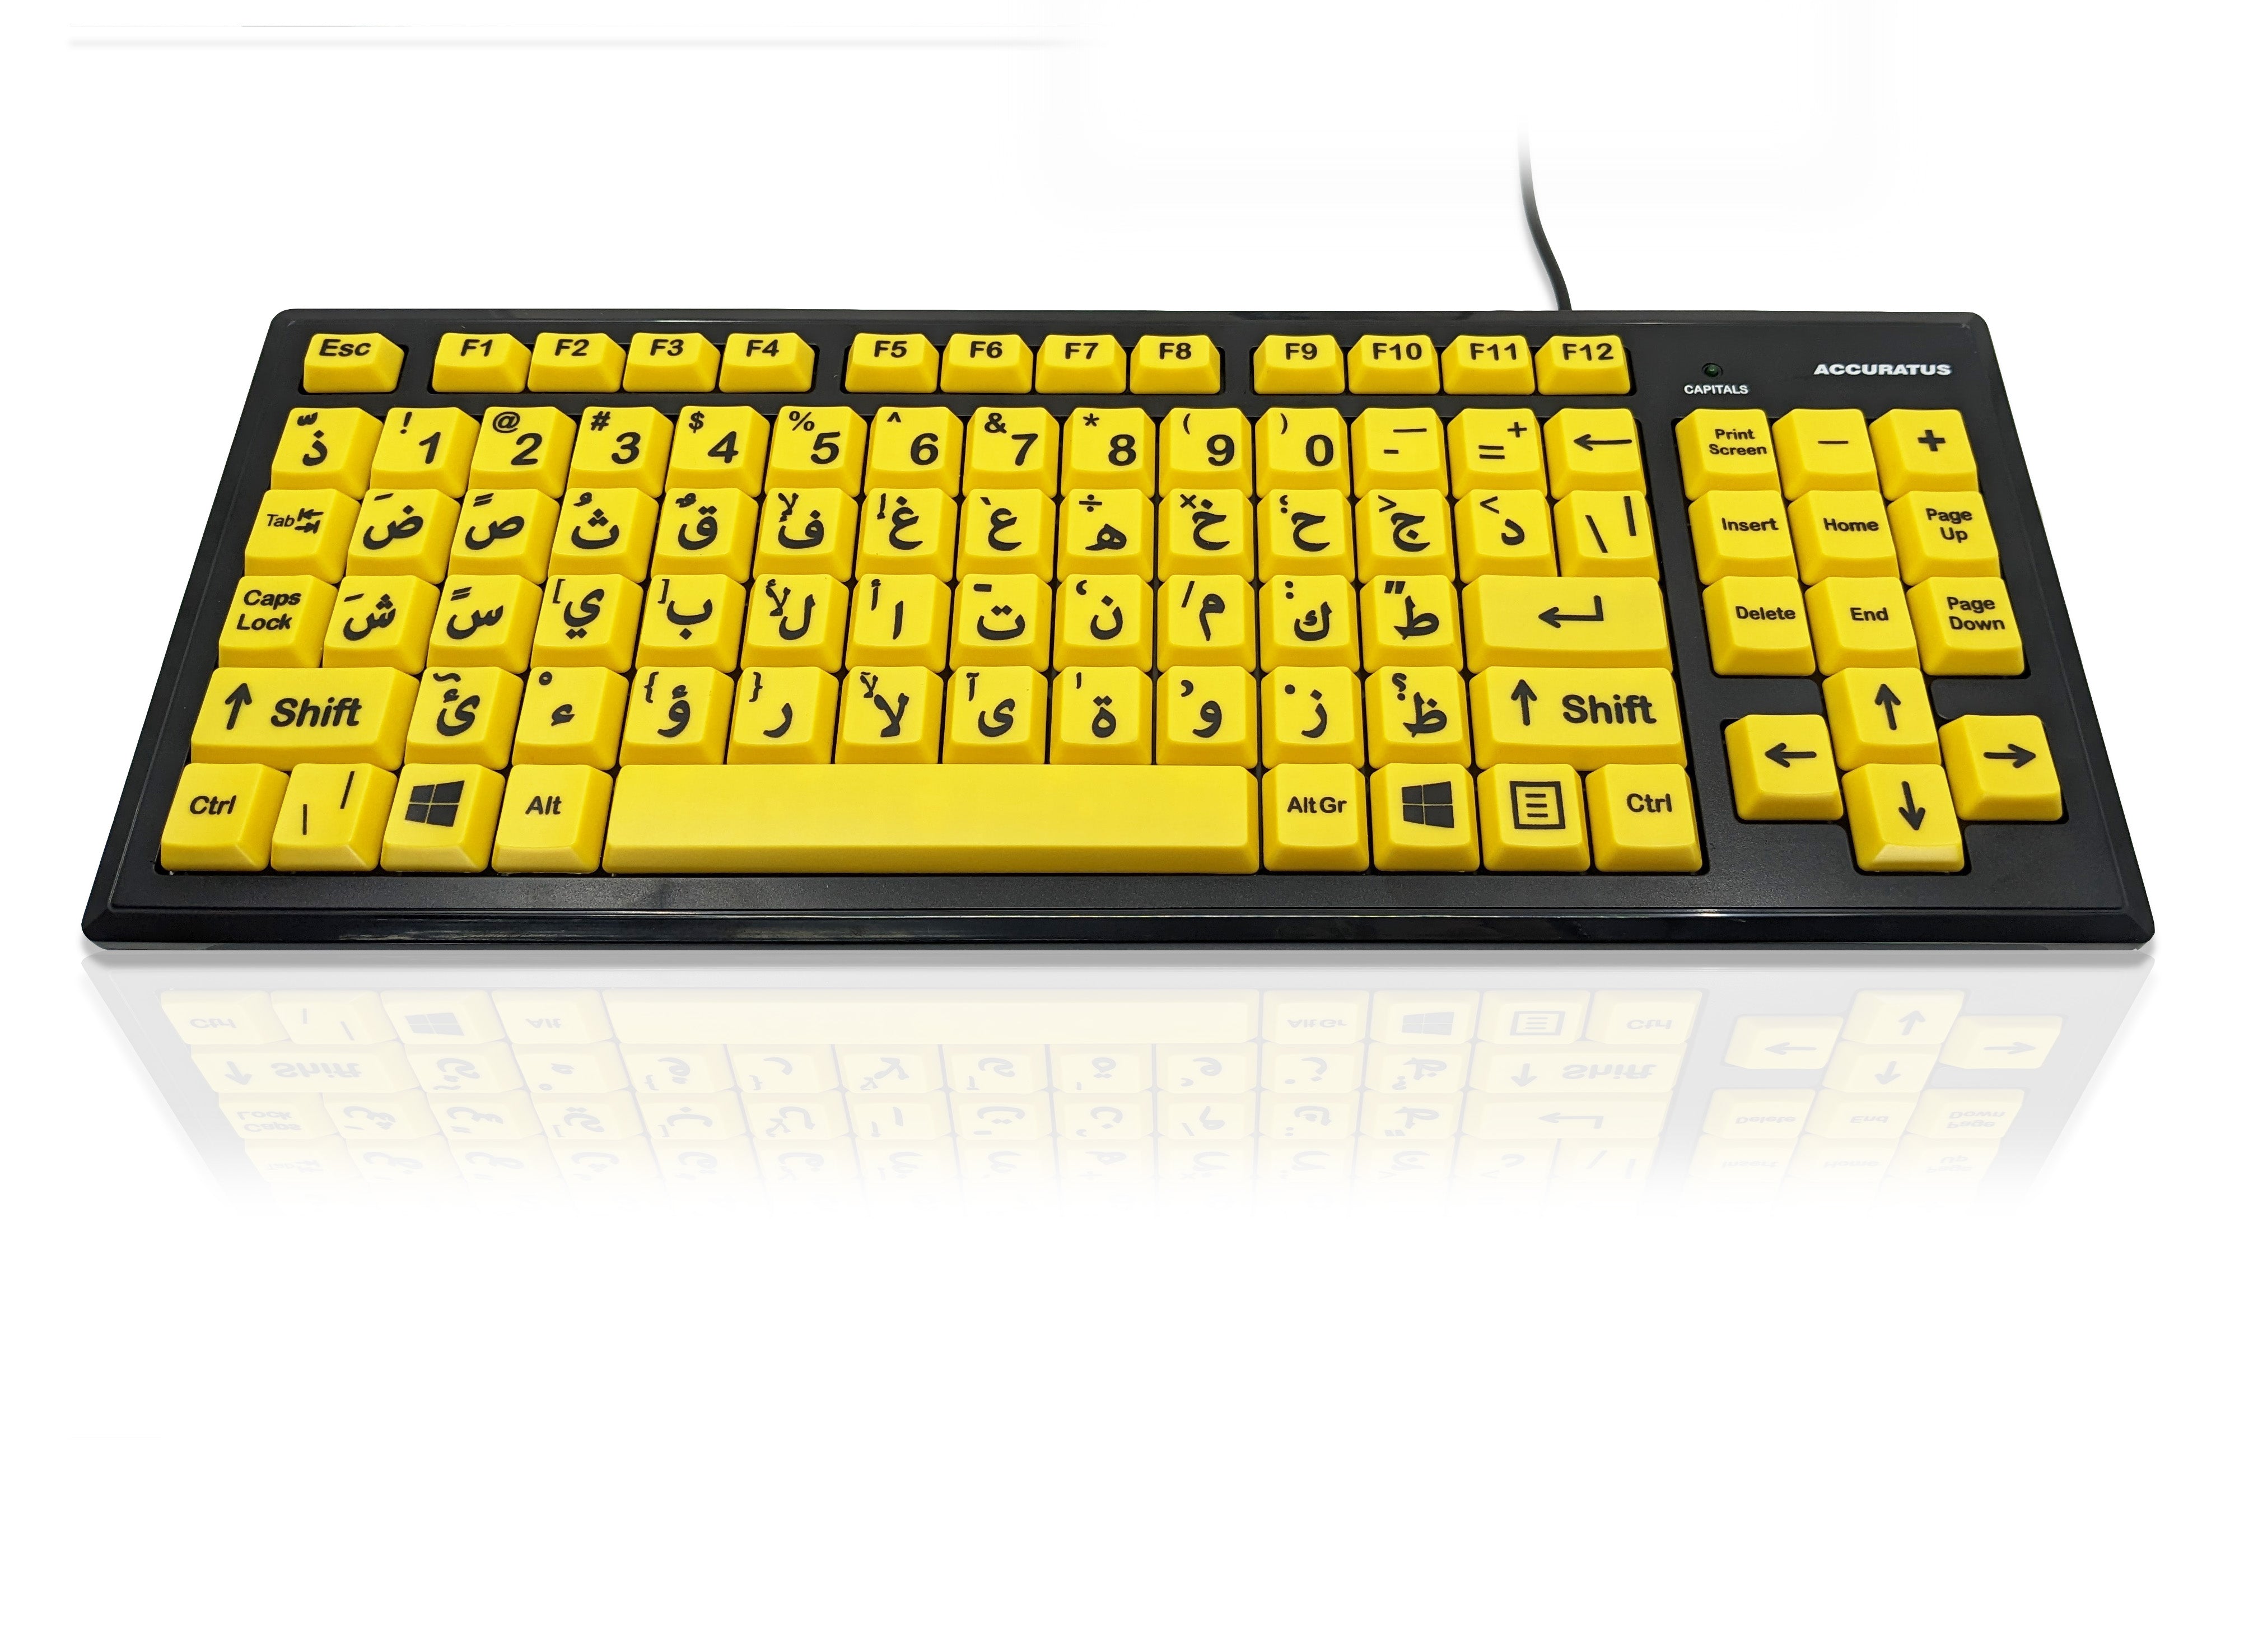 Accuratus Monster 2 - USB High Visibility Visual Impairment Keyboard with Extra Large Keys & 2 Port USB Hub